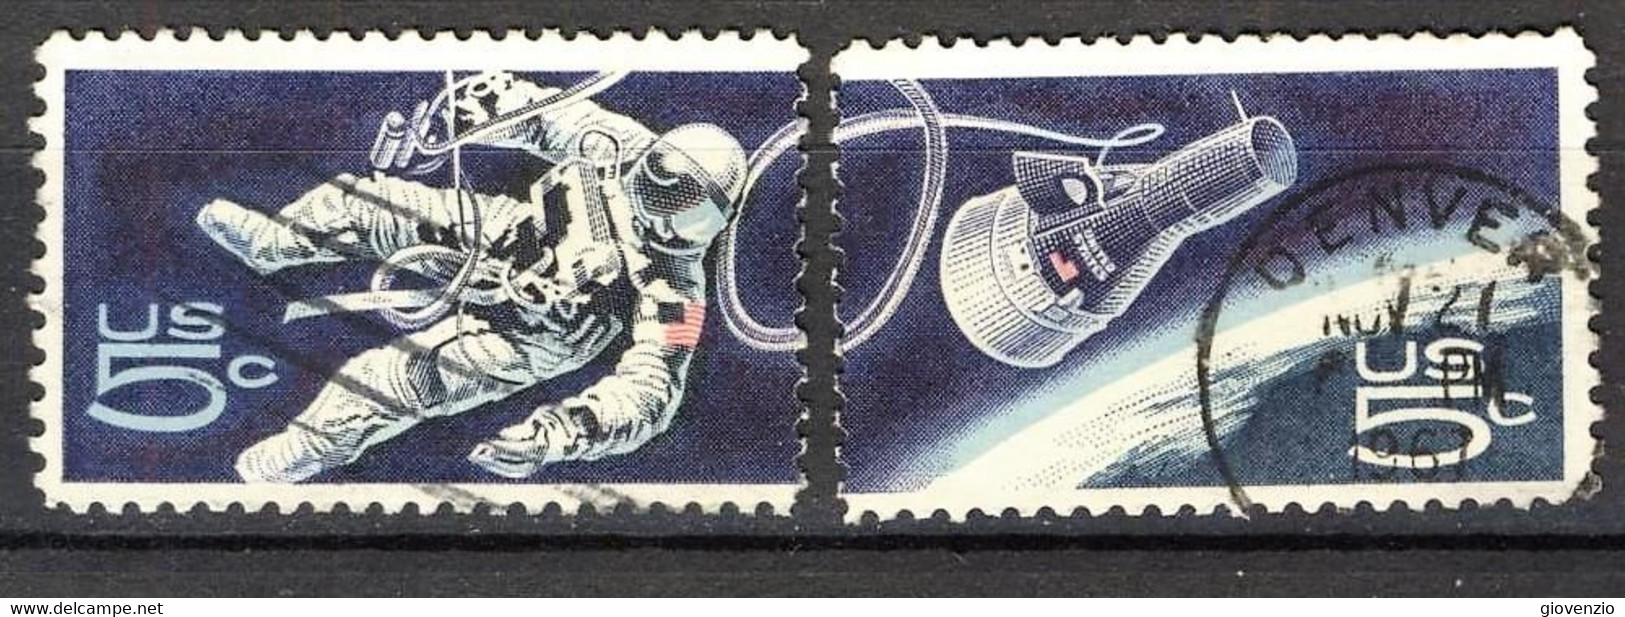 USA 1967 SPACE - United States